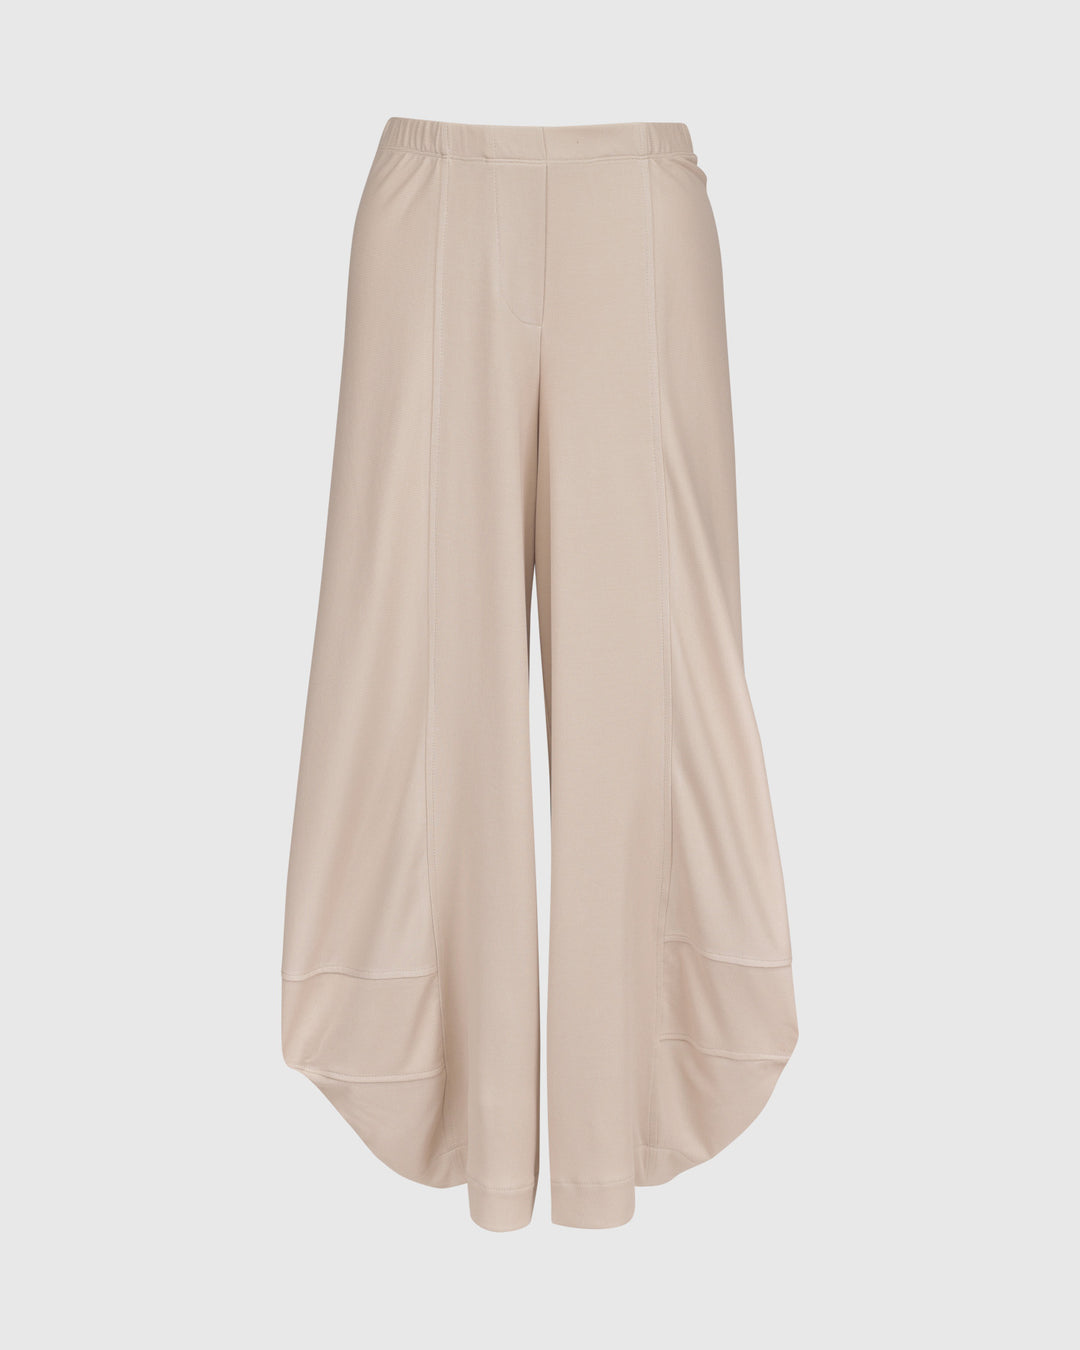 Essential Go-To Cupro Punto Pants, Ivory